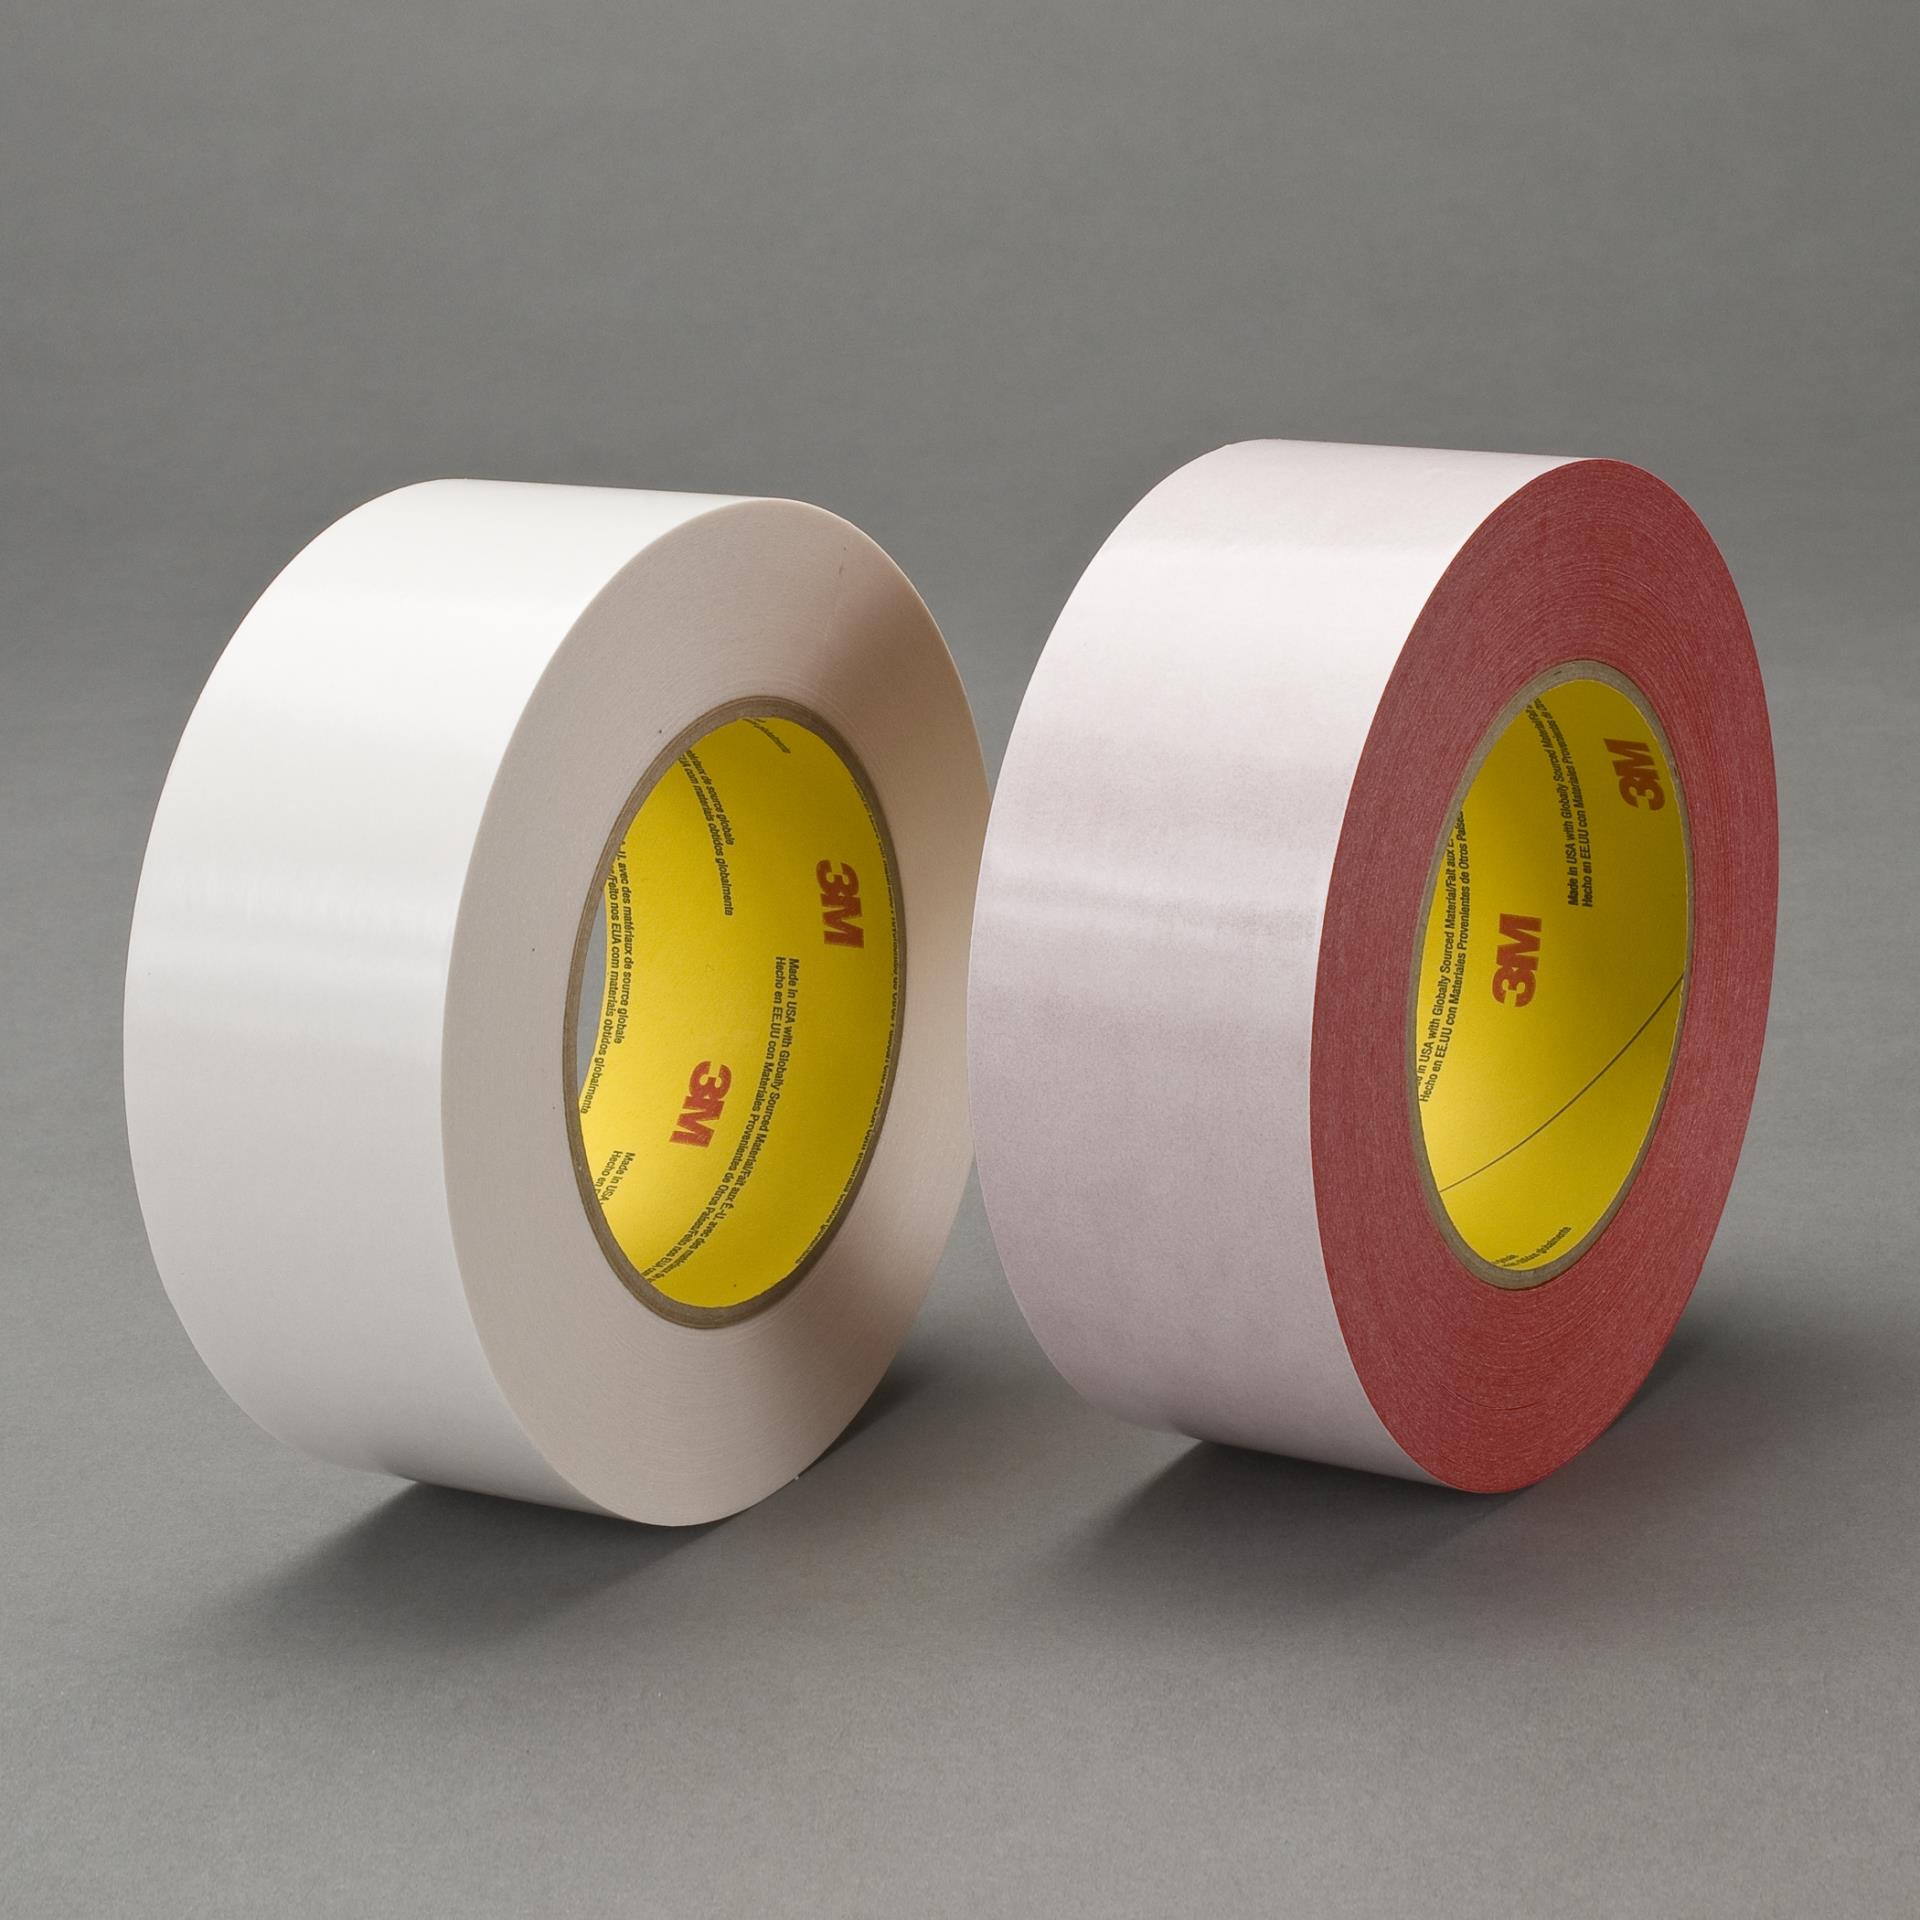 Double Sided Adhesive Tape Bonding Forever Black Extreme Double Sided Tape 0.045 X 1 X 60 X 1EA Mounting Tape Foam Tape 